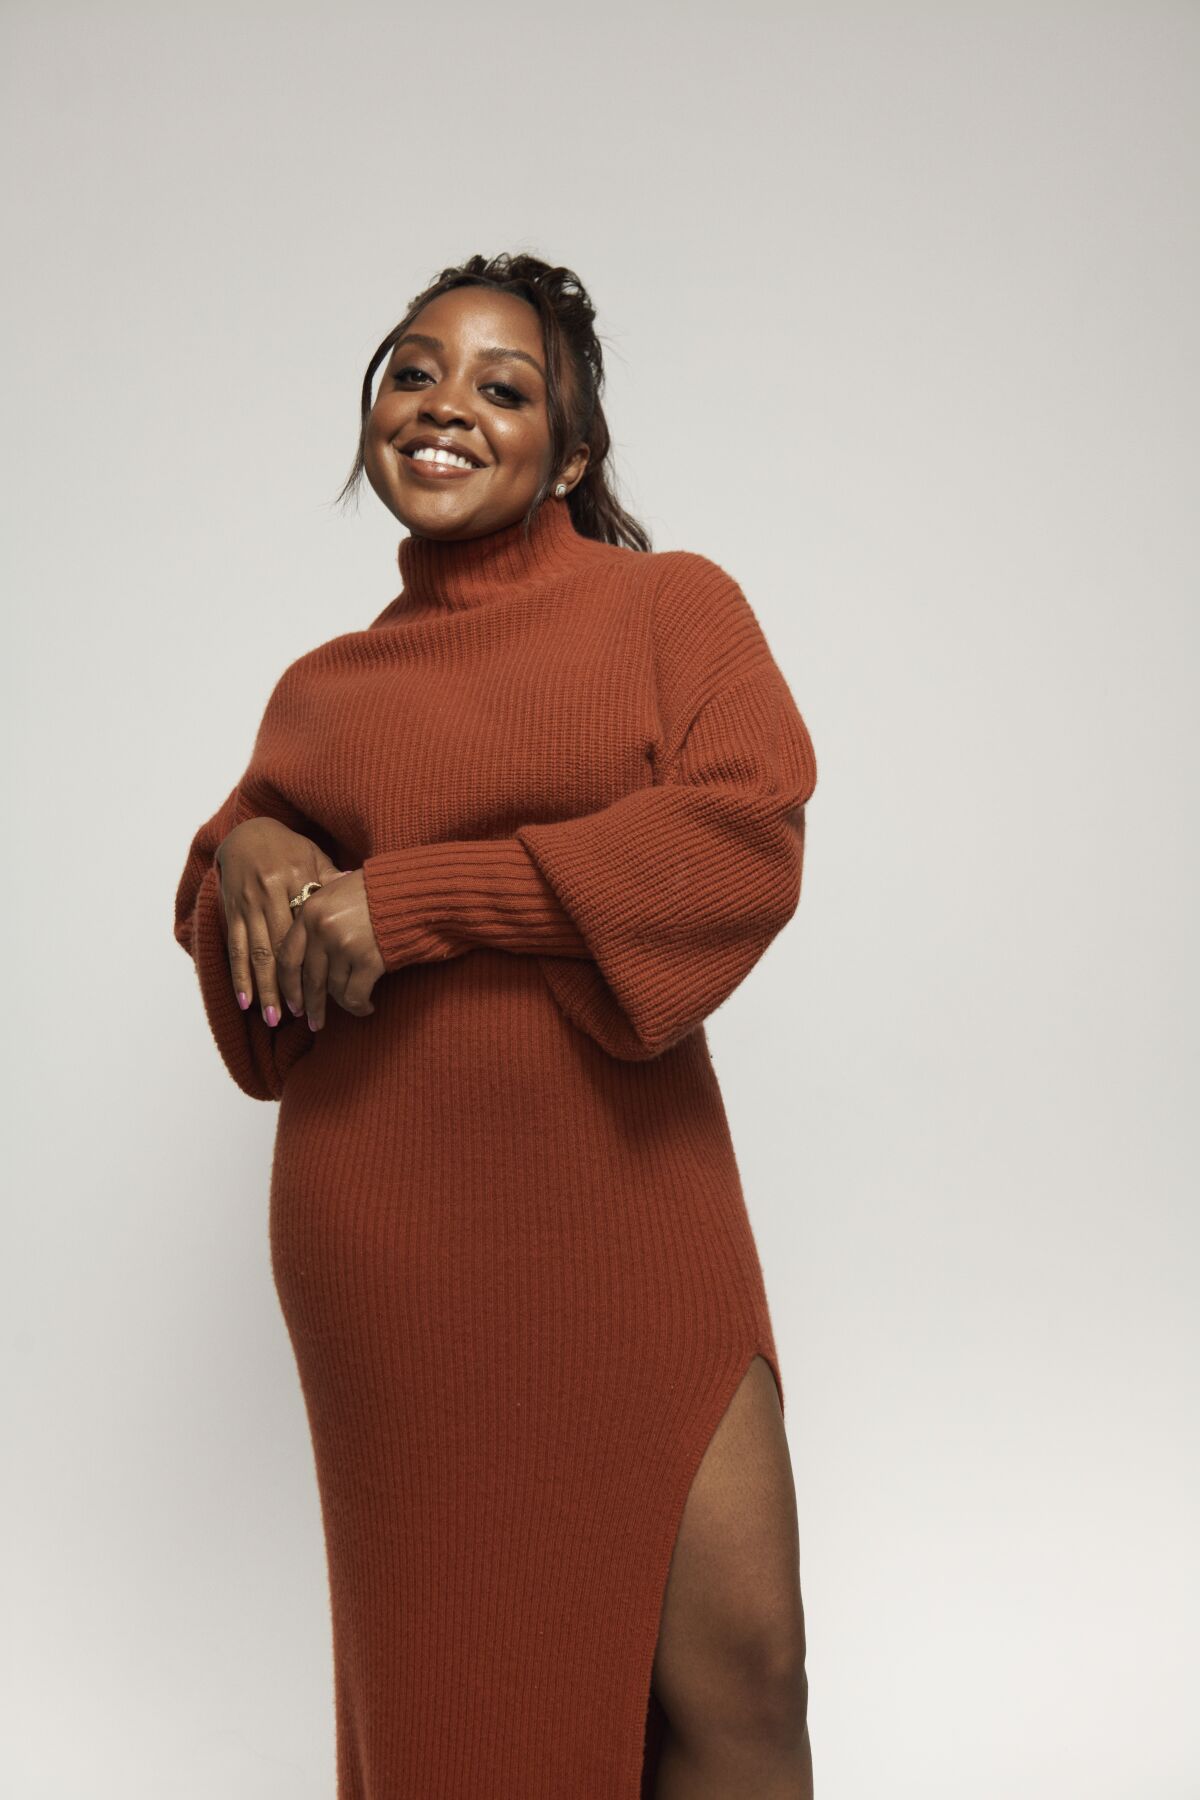 Quinta Brunson poses for a portrait in a side-slit sweater dress.